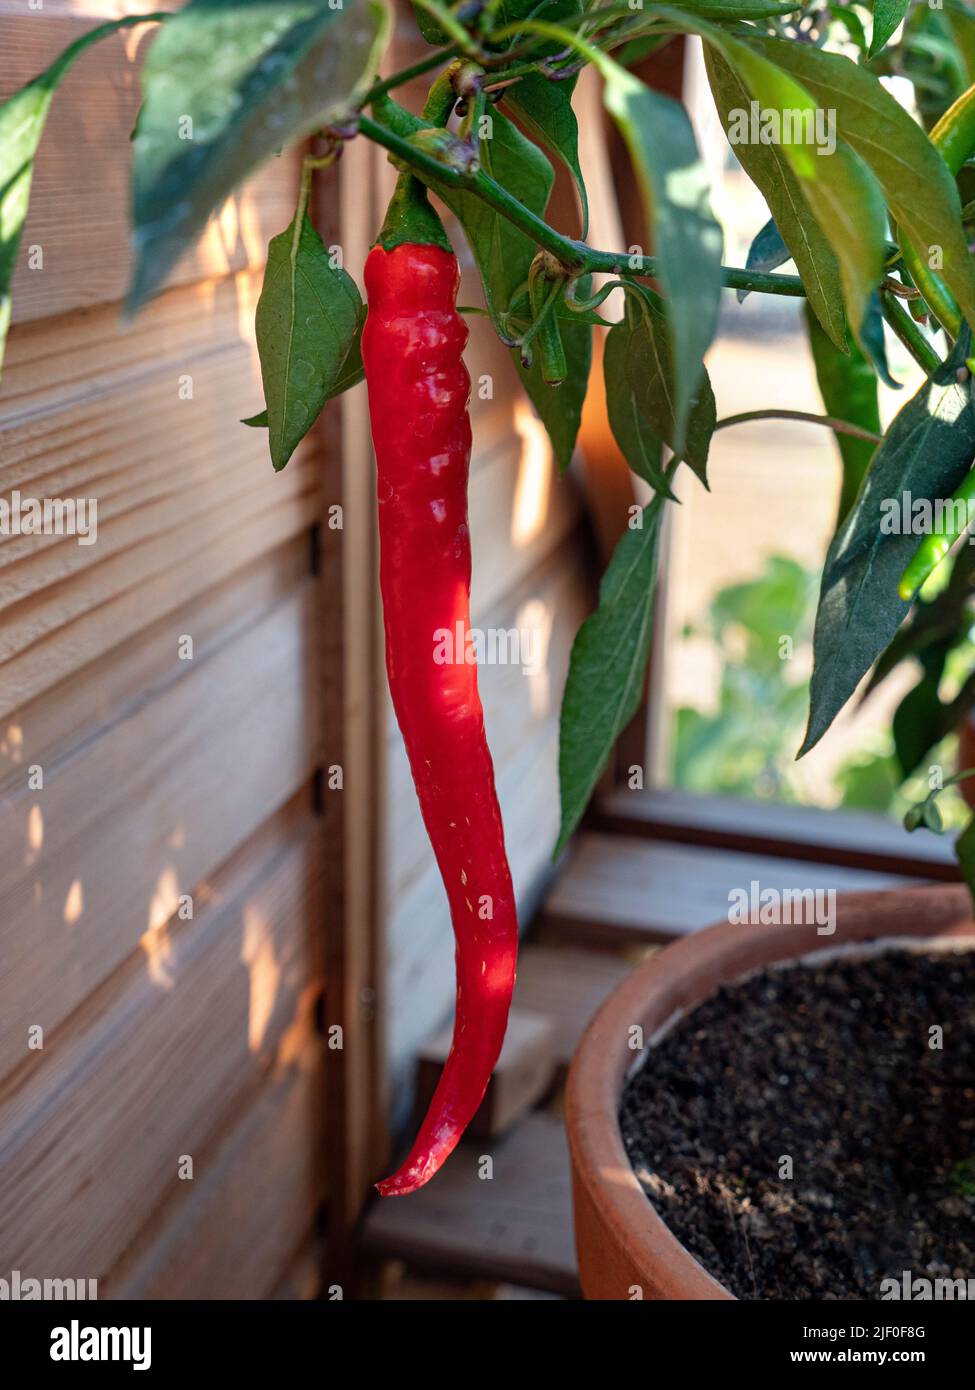 Chilli Aci Kil potted in traditional wooden greenhouse. Turkish cayenne chill that ripens to a red, medium hot chilli that can be dried or used fresh. Stock Photo